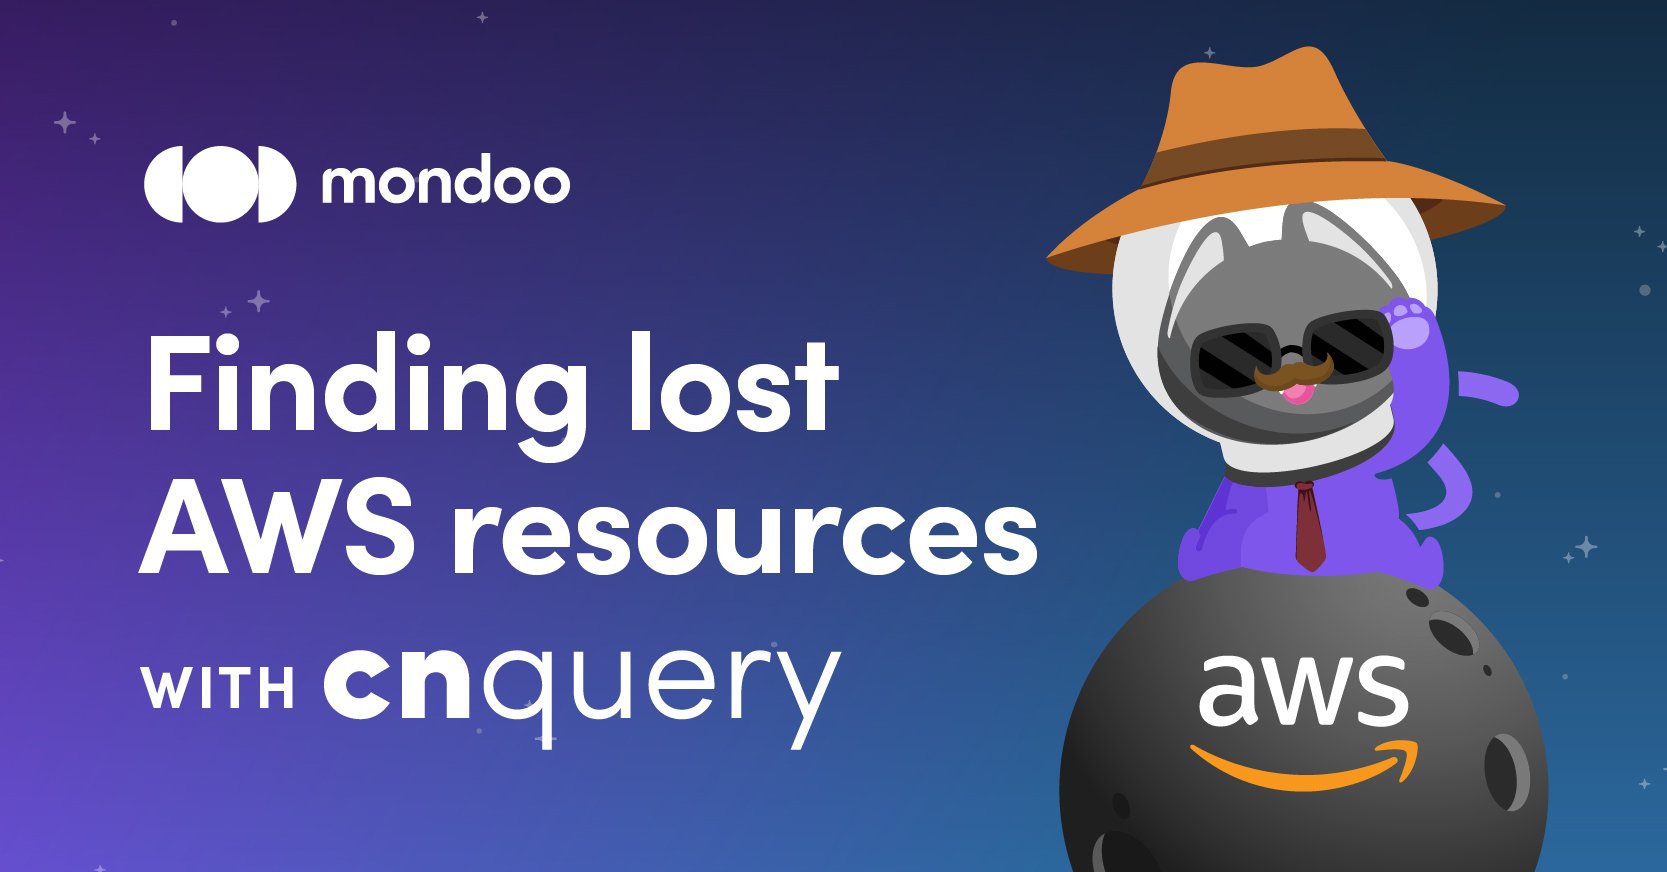 Mondoo_graphics_Finding lost AWS resources-02